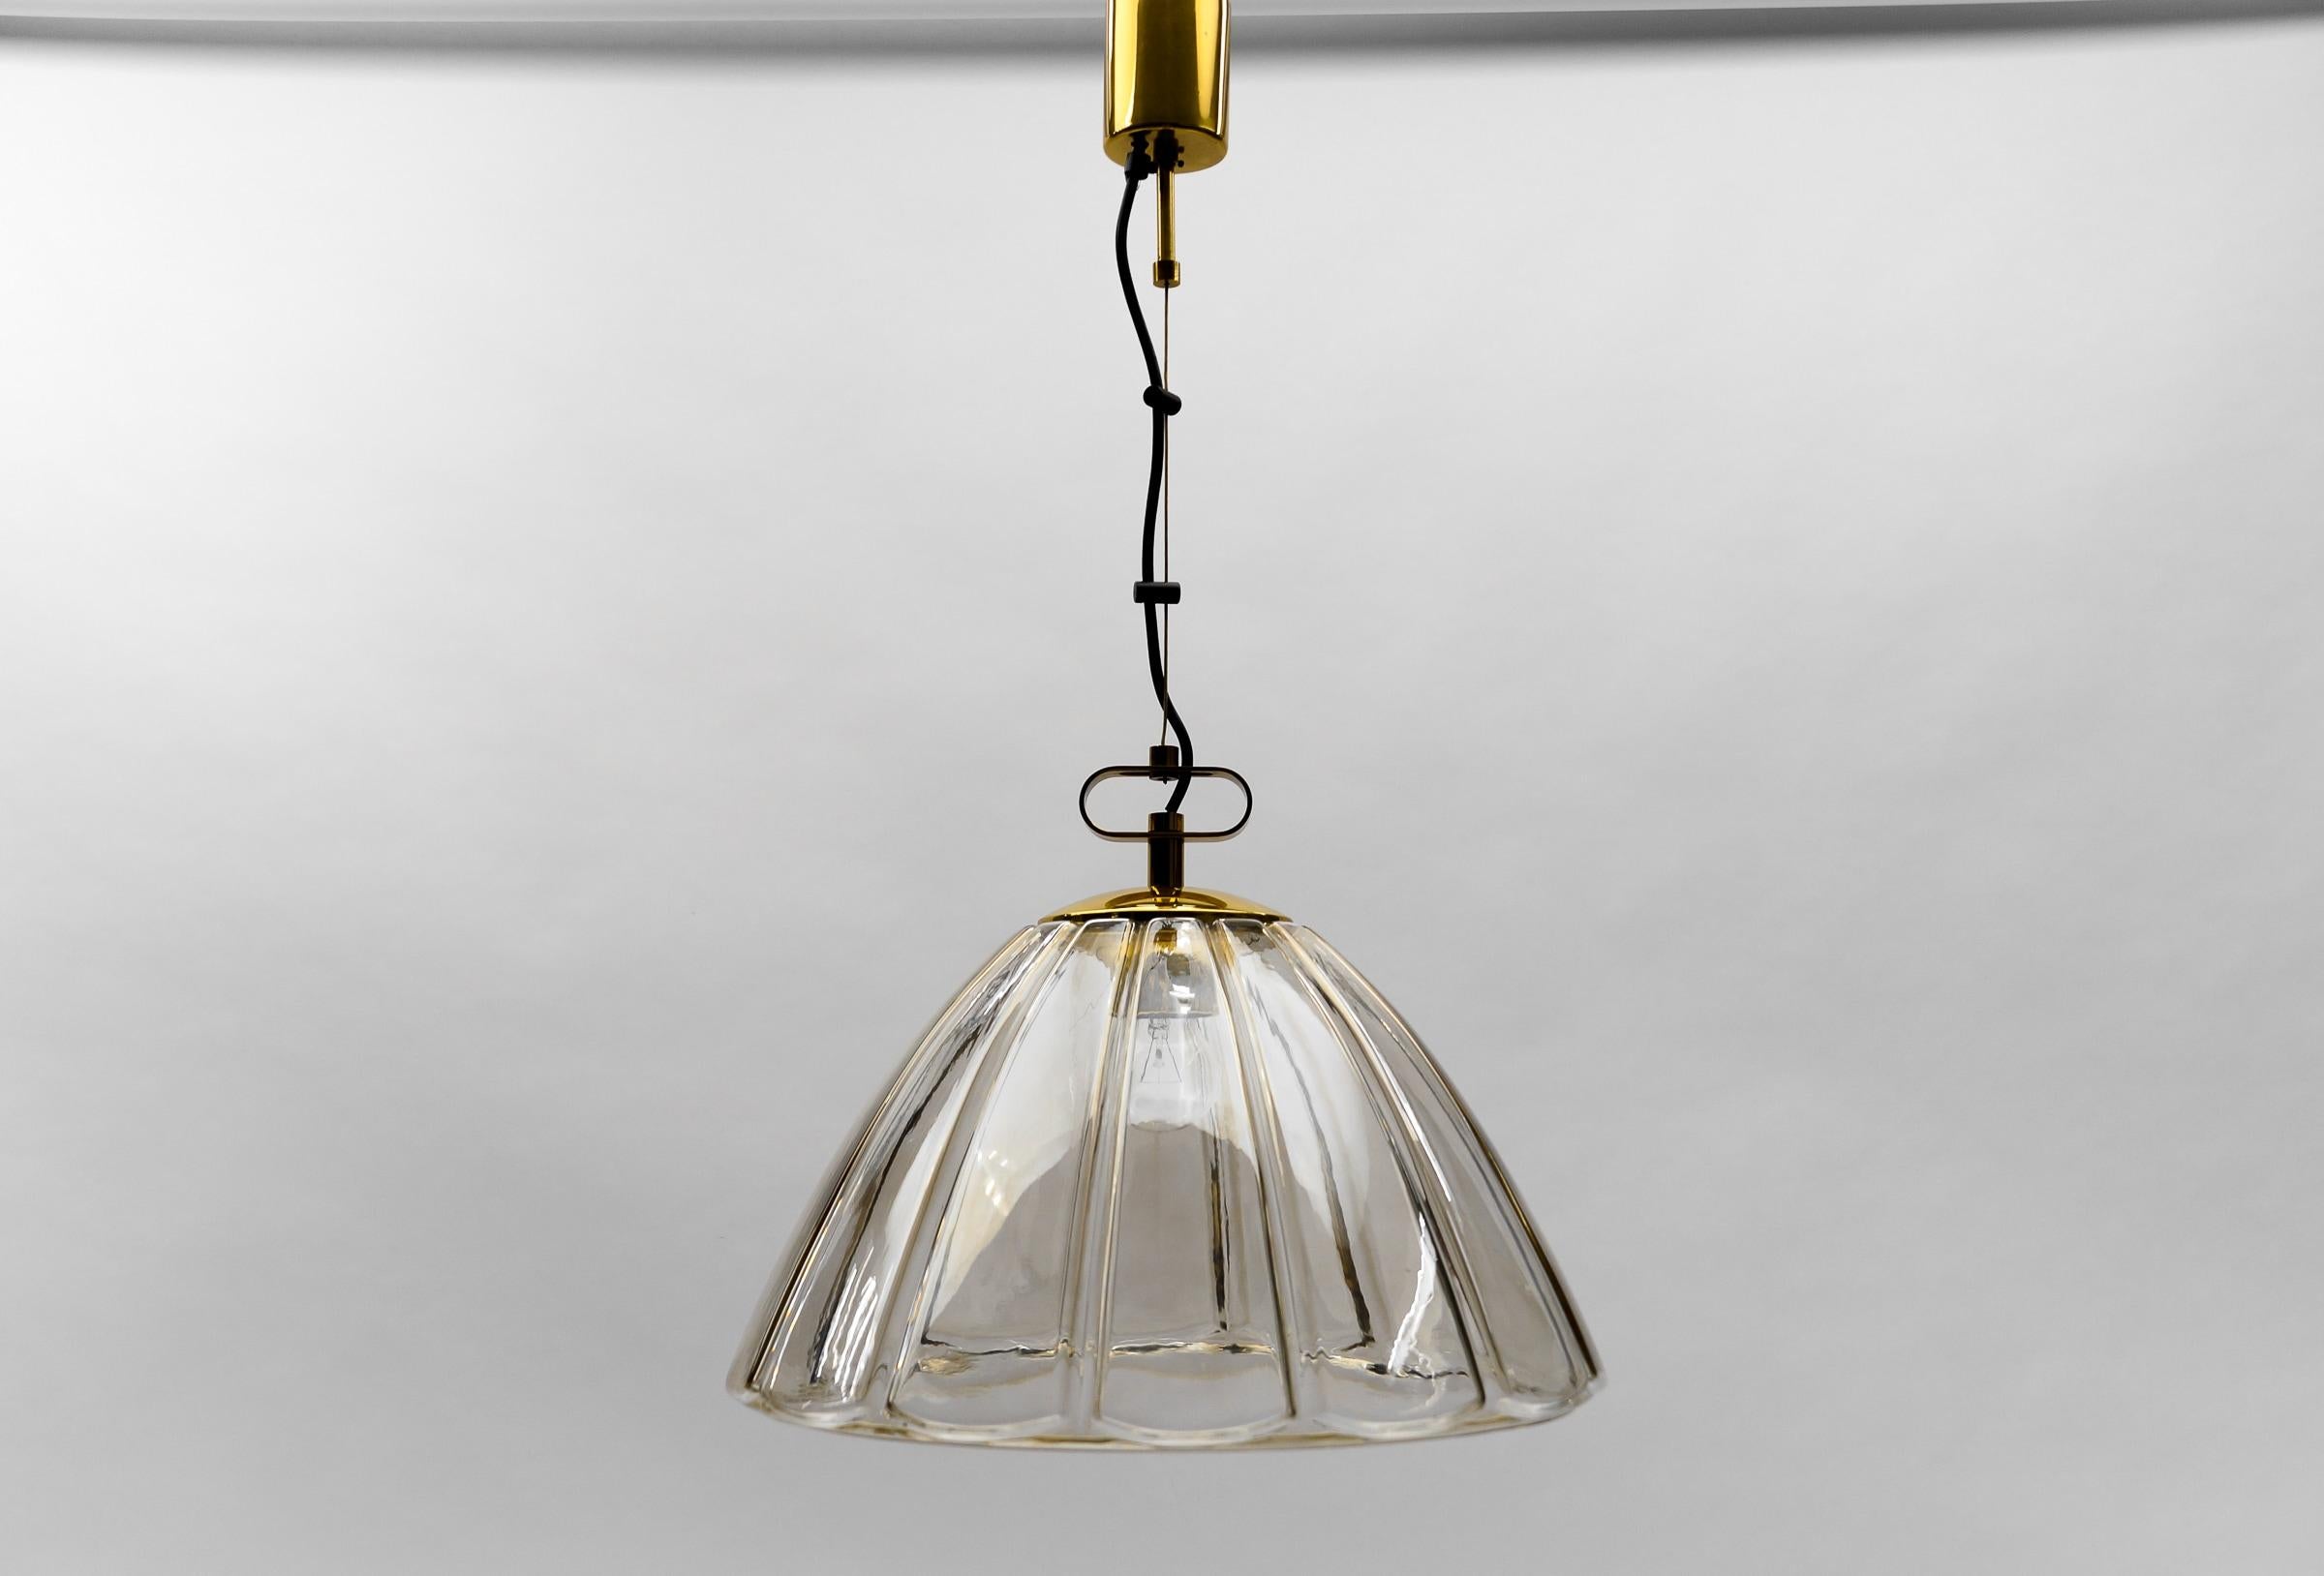 Elegant Mid-Century Modern Smoked Glass Pendant Lamp by Limburg, 1960s Germany

Dimensions
Diameter: 17.71 in. (45 cm)
Height: 29.52 in. (75 cm)

One E27 socket. Works with 220V and 110V.

Our lamps are checked, cleaned and are suitable for use in